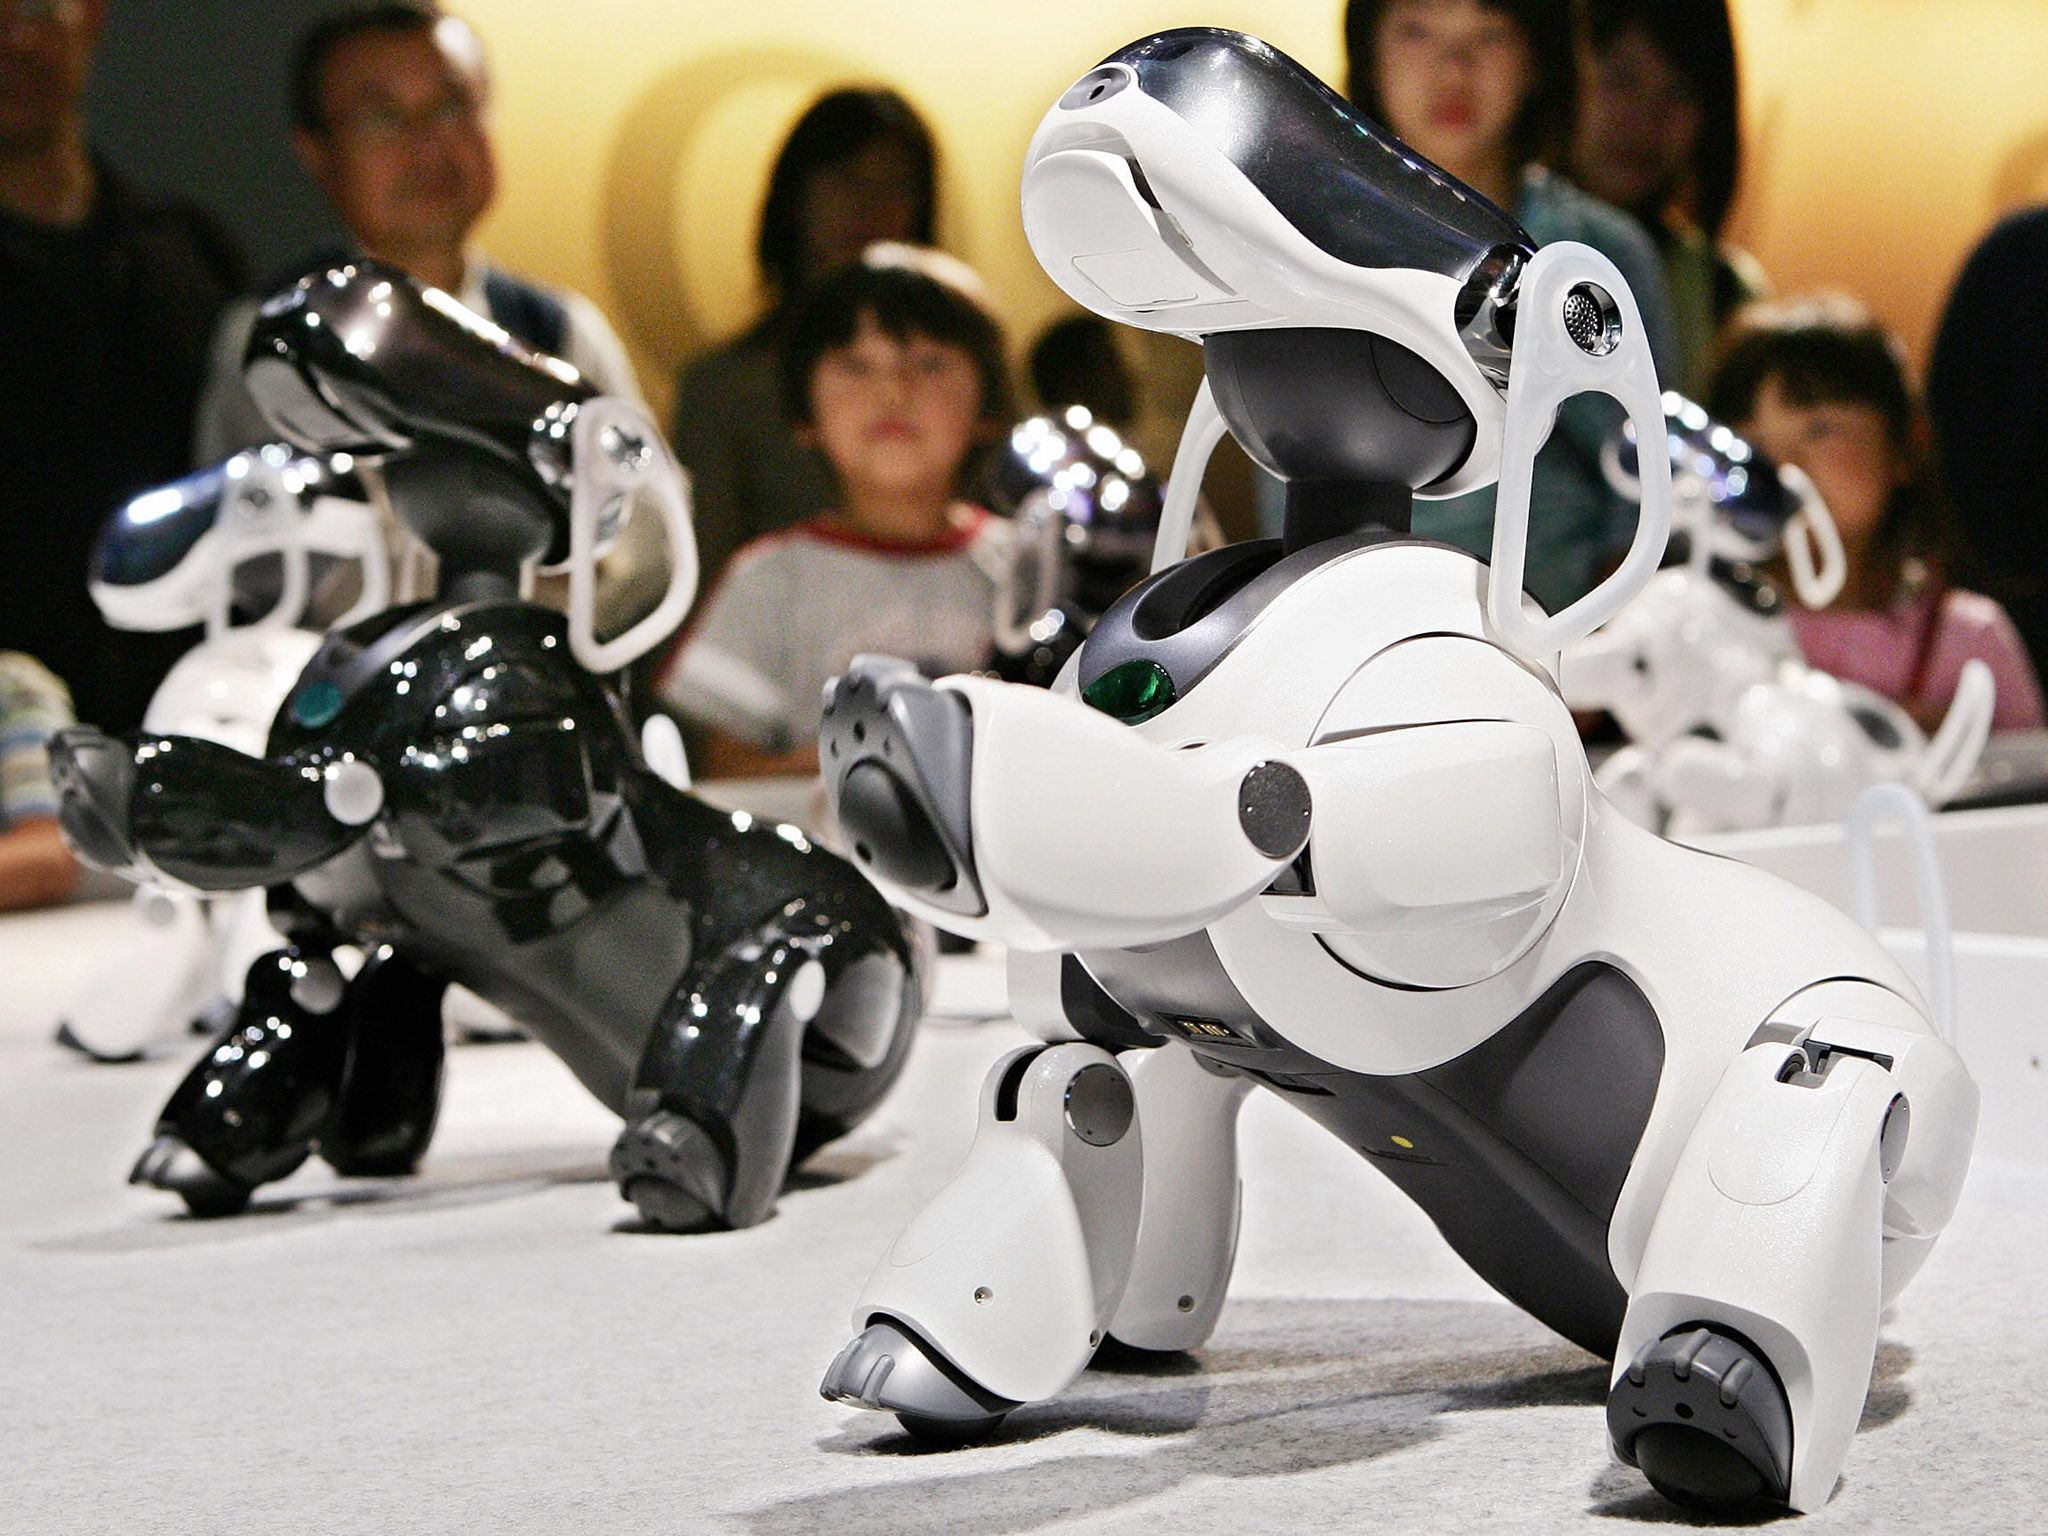 Aibo (1999) - ROBOTS: Your Guide to the World of Robotics